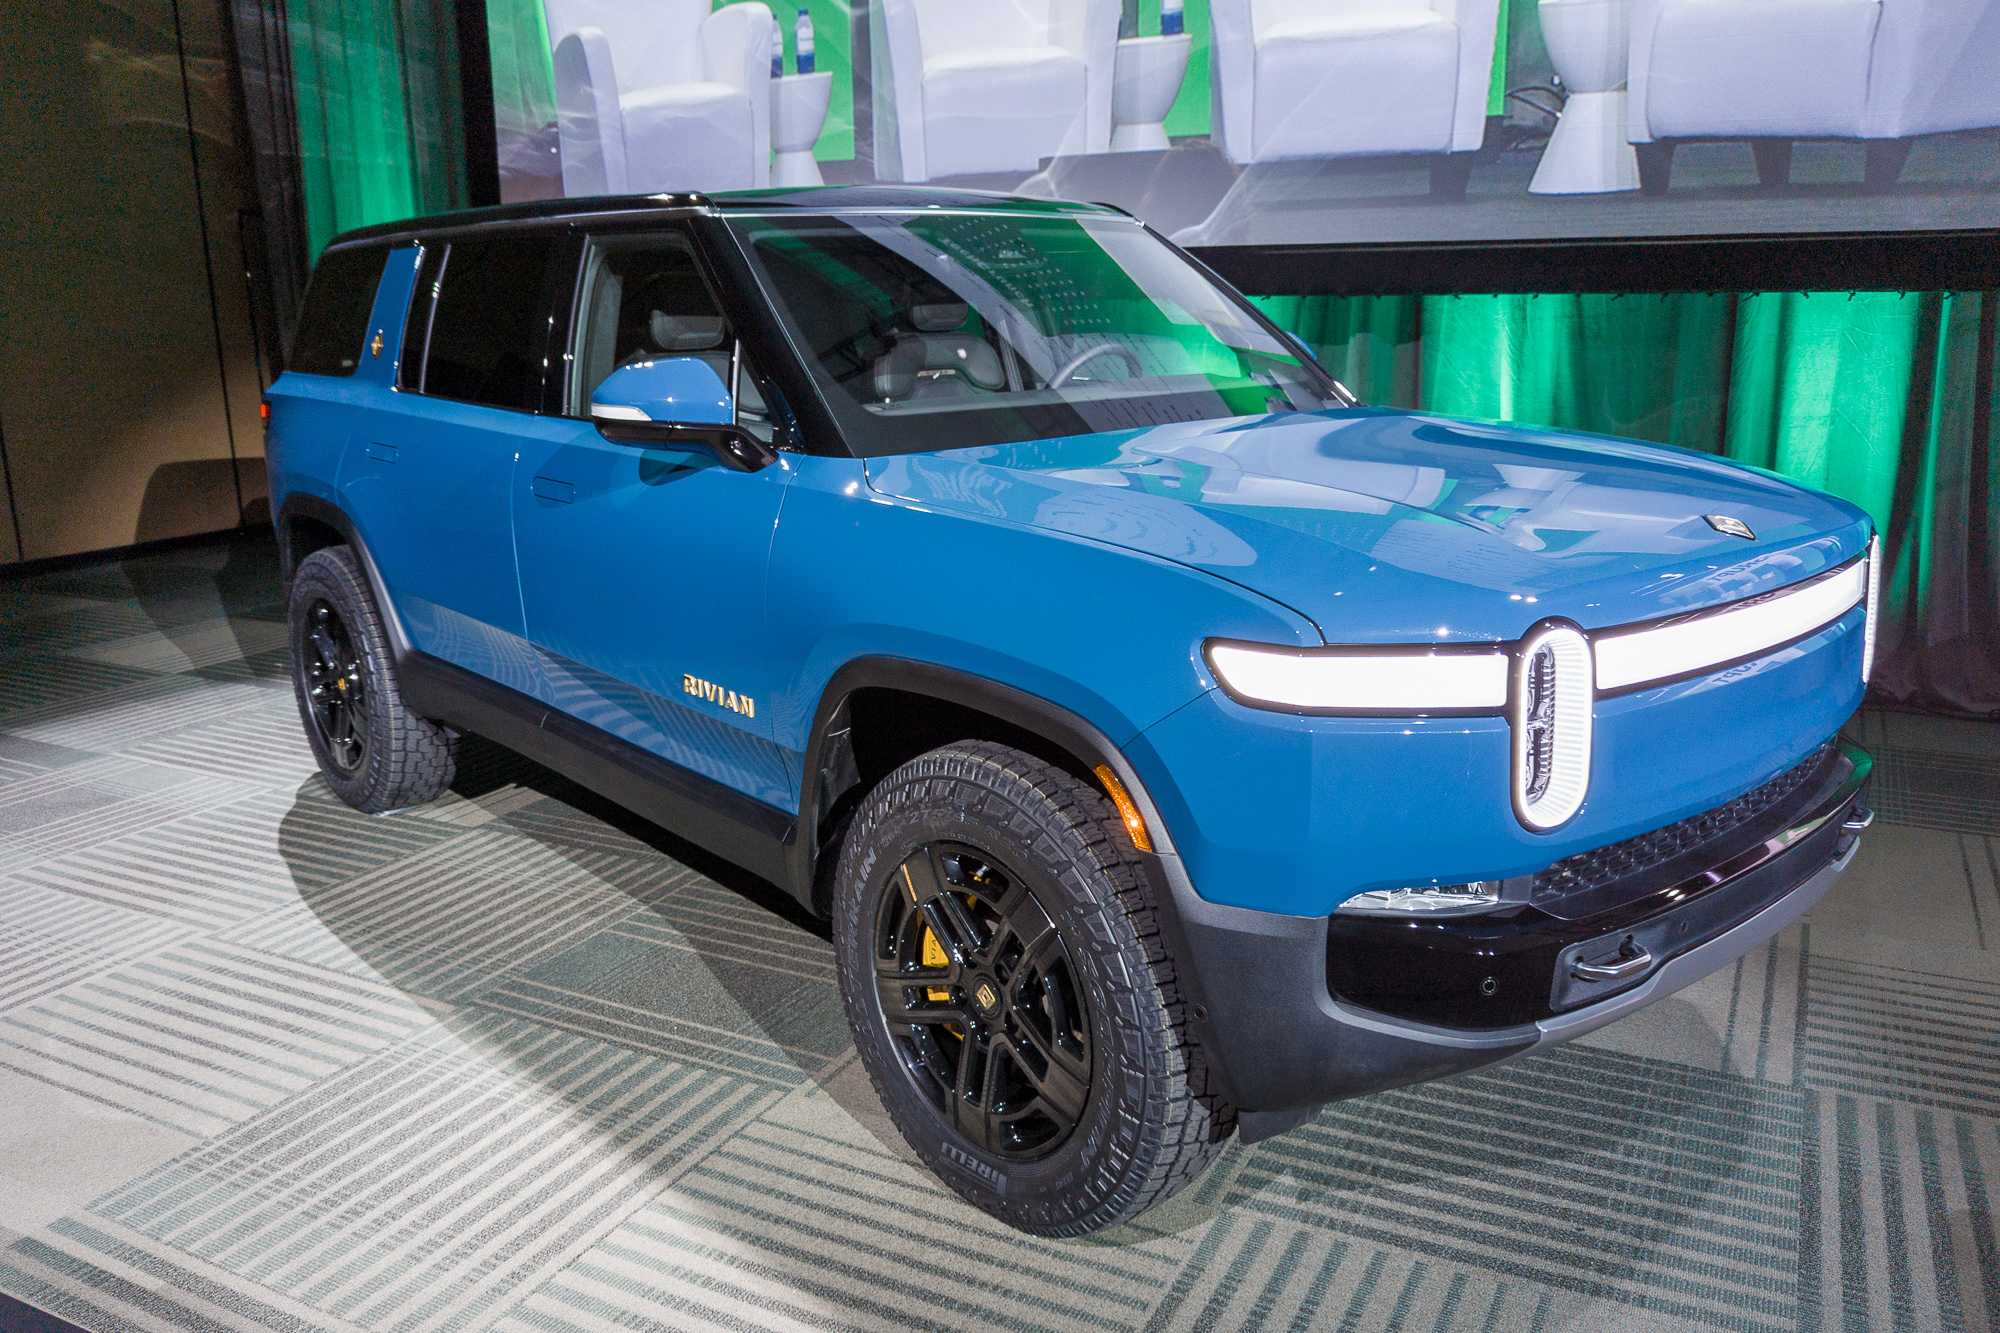 Rivian Makes Great Strides Despite Challenges While Introducing The “RJ” Subscription Service